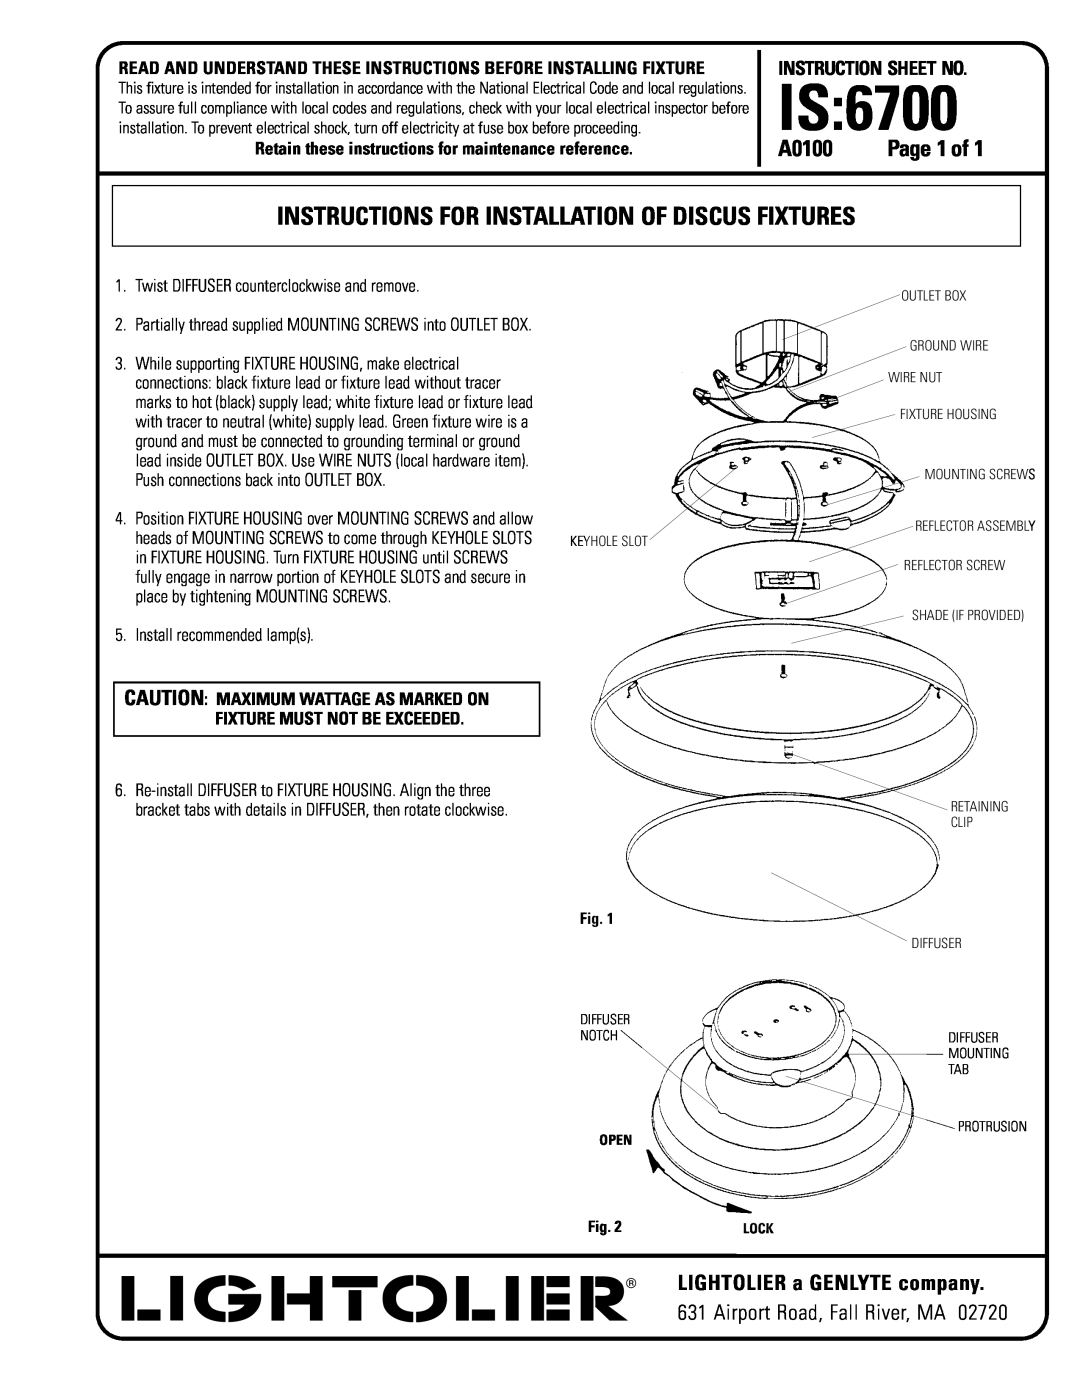 Lightolier A0100 instruction sheet Is, Instructions For Installation Of Discus Fixtures, LIGHTOLIER a GENLYTE company 